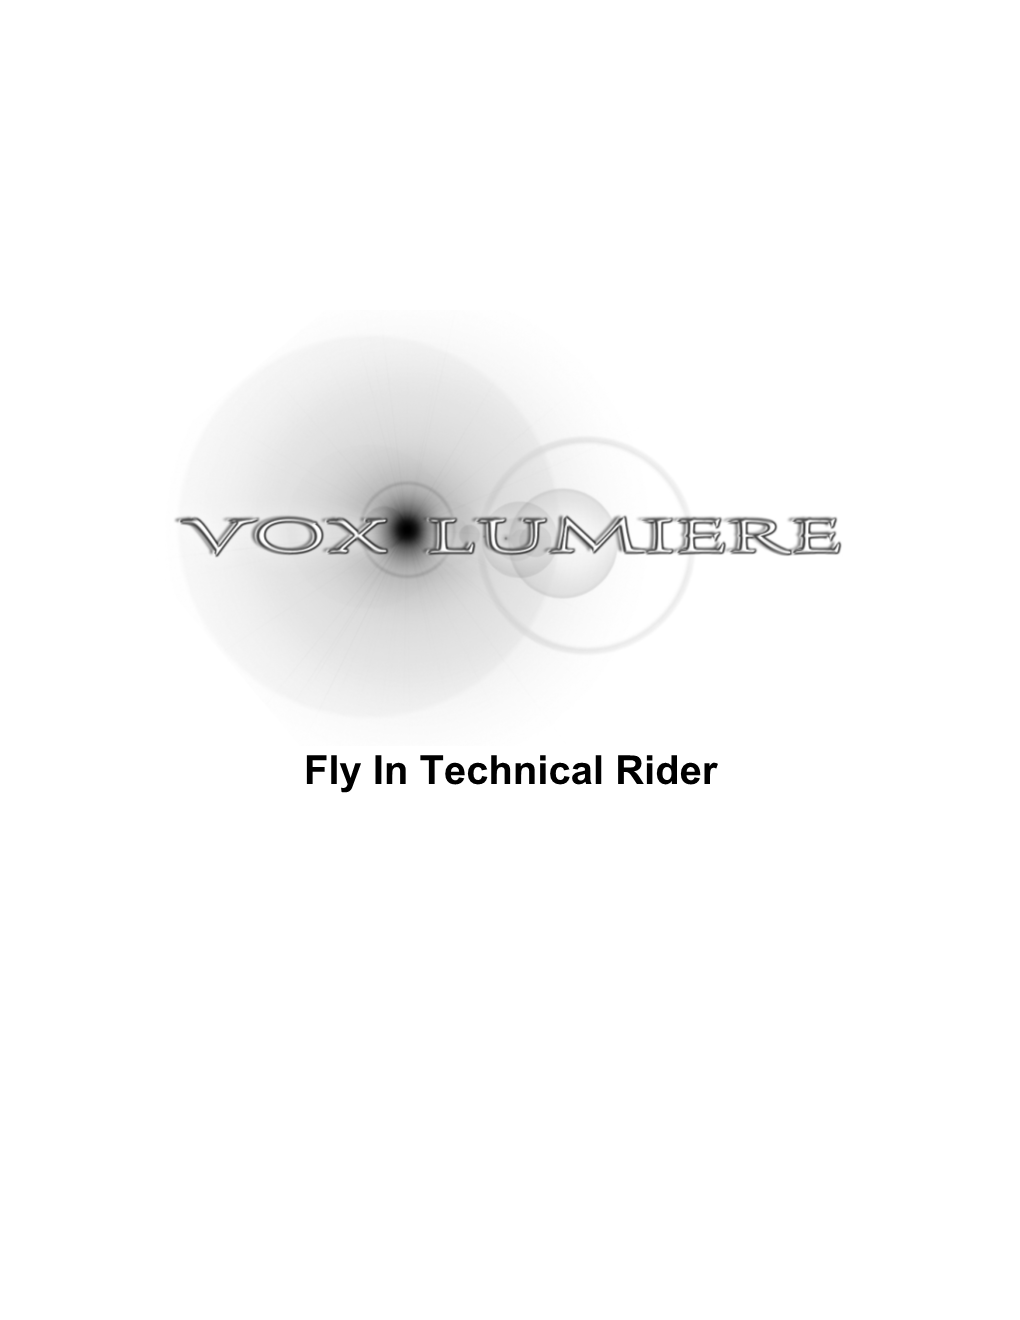 Fly in Technical Rider Vox Lumiere – Fly in Technical Rider